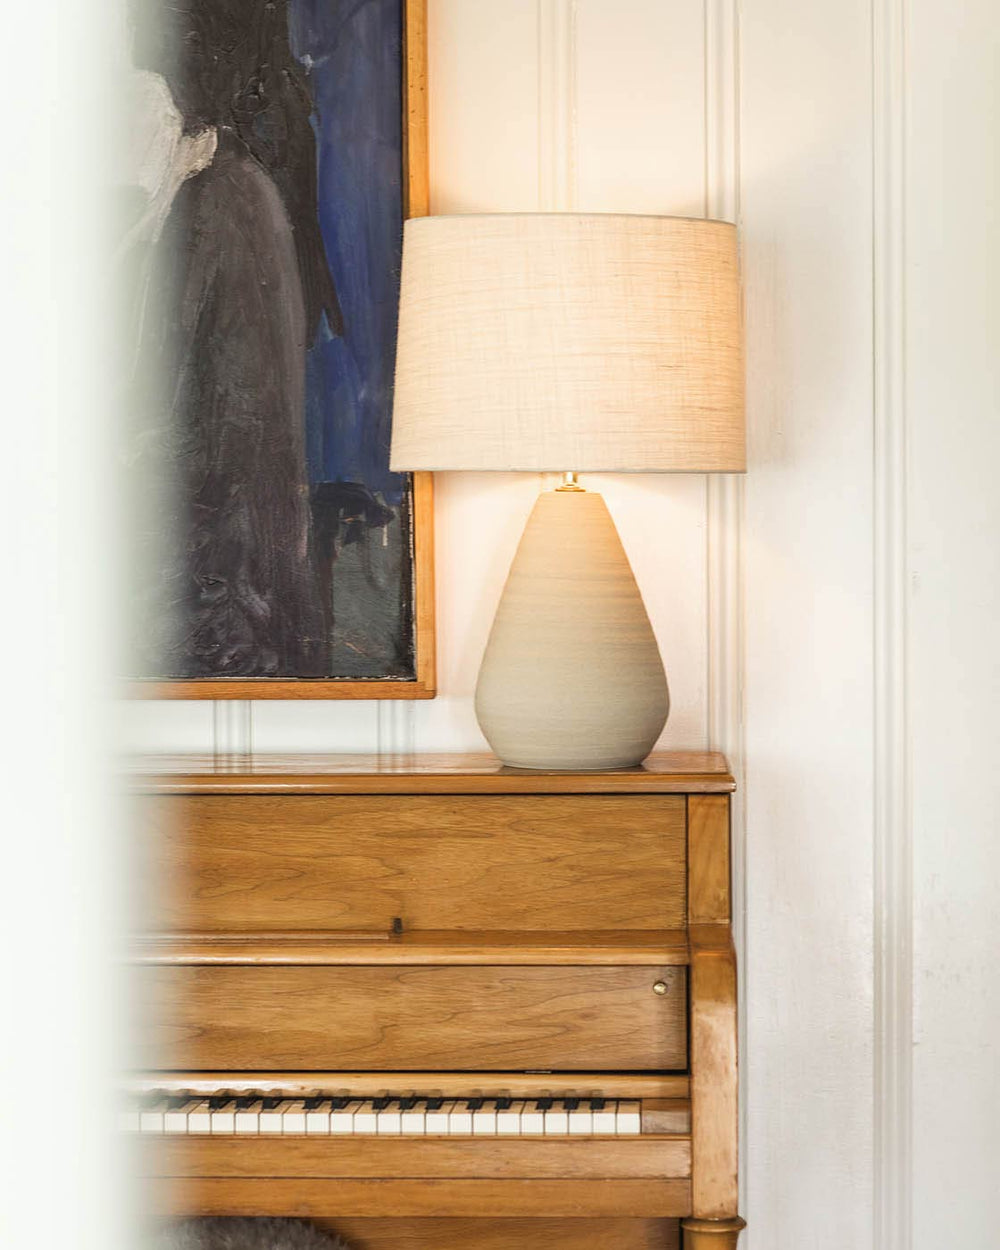 The Large Teardrop Lamp in Oat on a piano